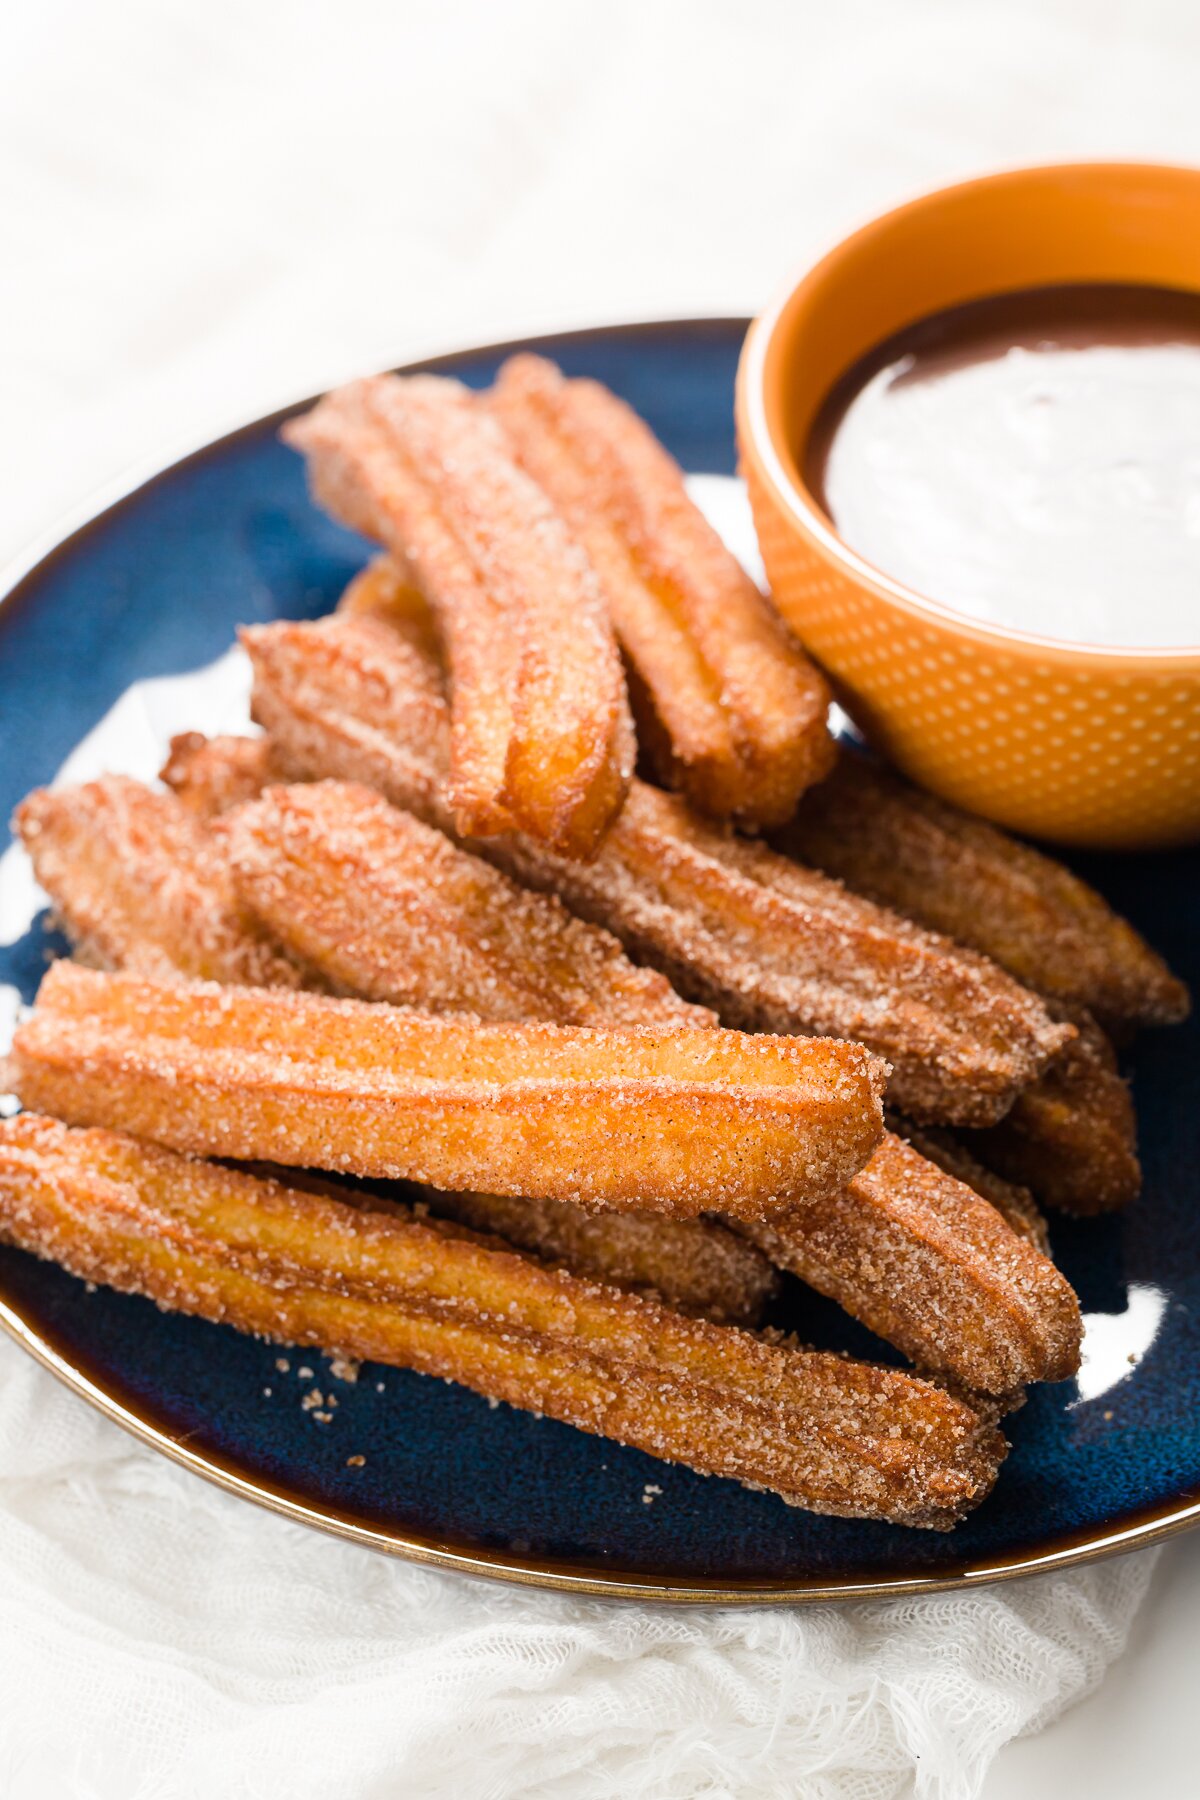 Plate of churros with a bowl of chocolate sauce on it